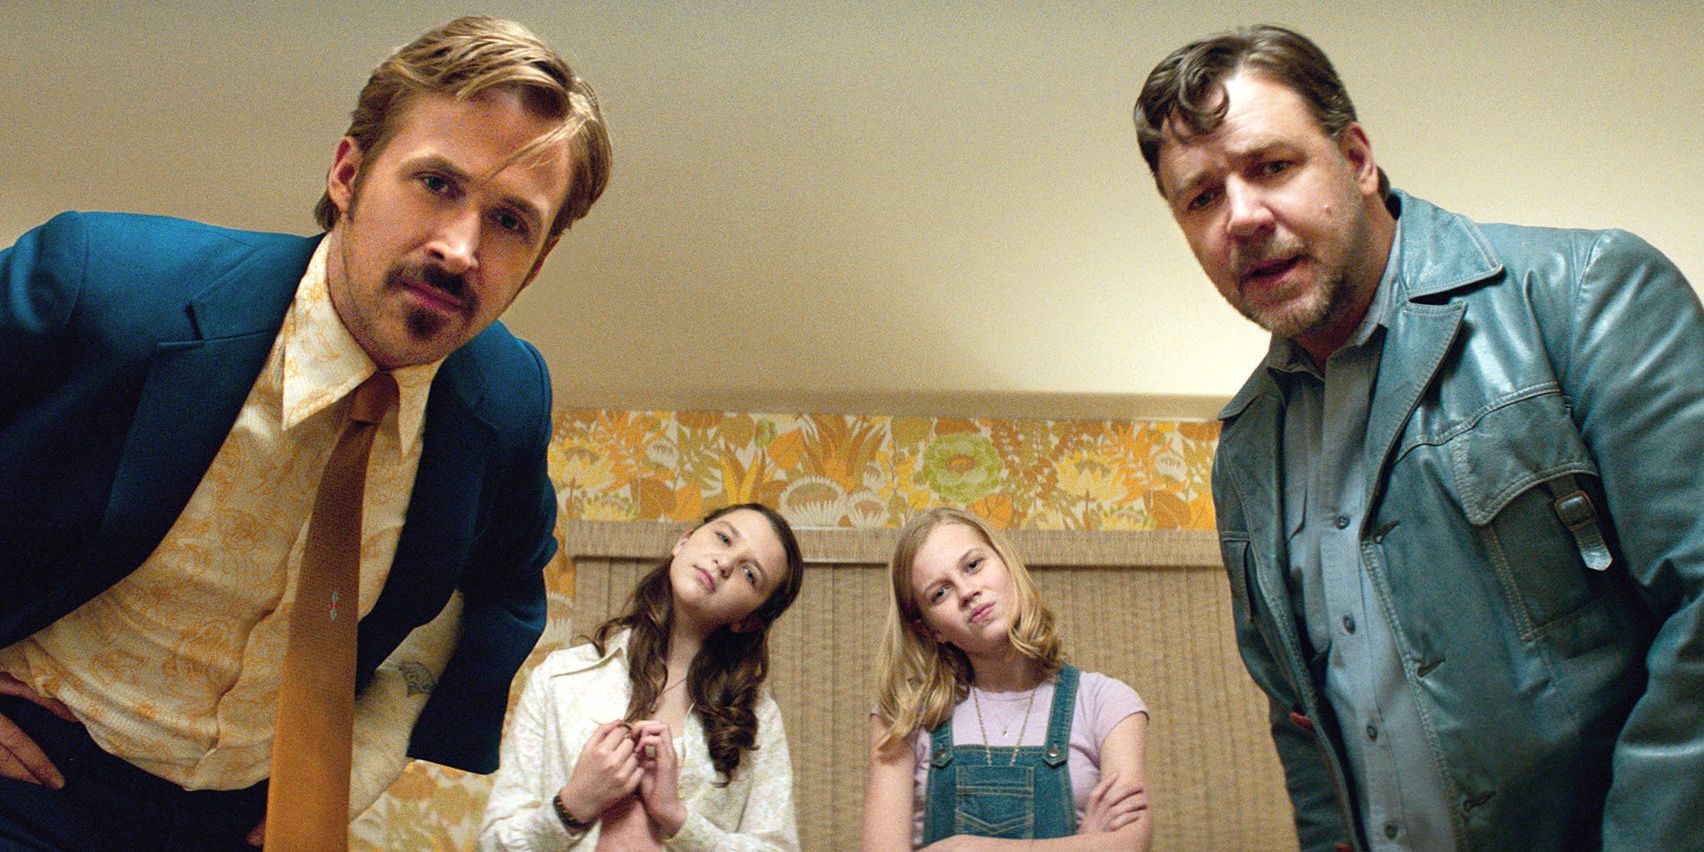 The World’s Worst Detectives: 10 Behind-The-Scenes Facts About The Nice Guys